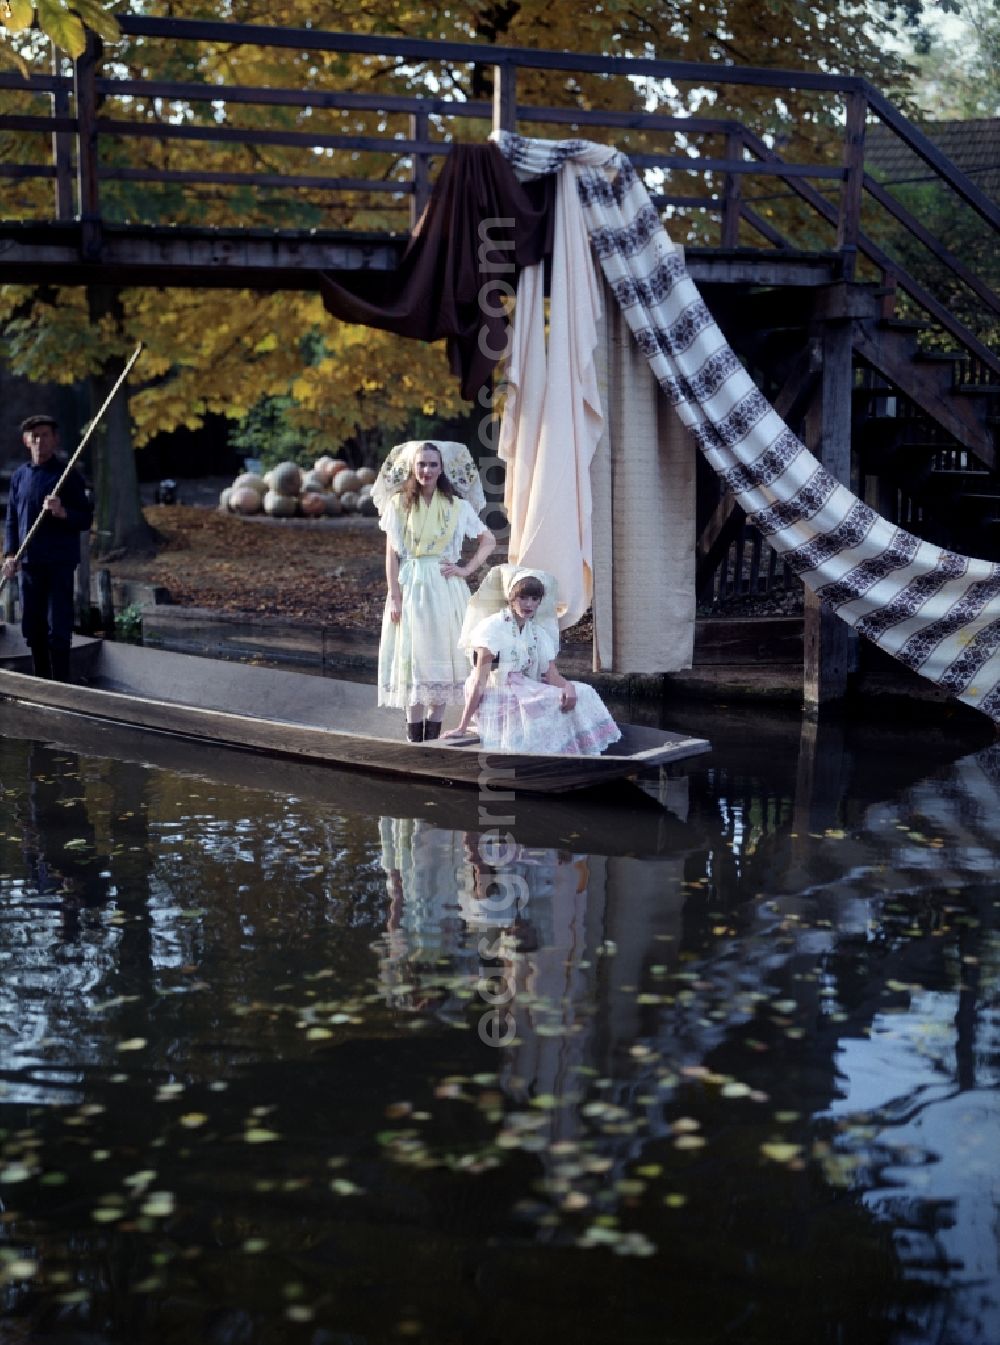 GDR image archive: Lübben (Spreewald) - Costumes and garments of the Sorbian ethnic group in the Spreewald in Luebben (Spreewald) in the state Brandenburg on the territory of the former GDR, German Democratic Republic